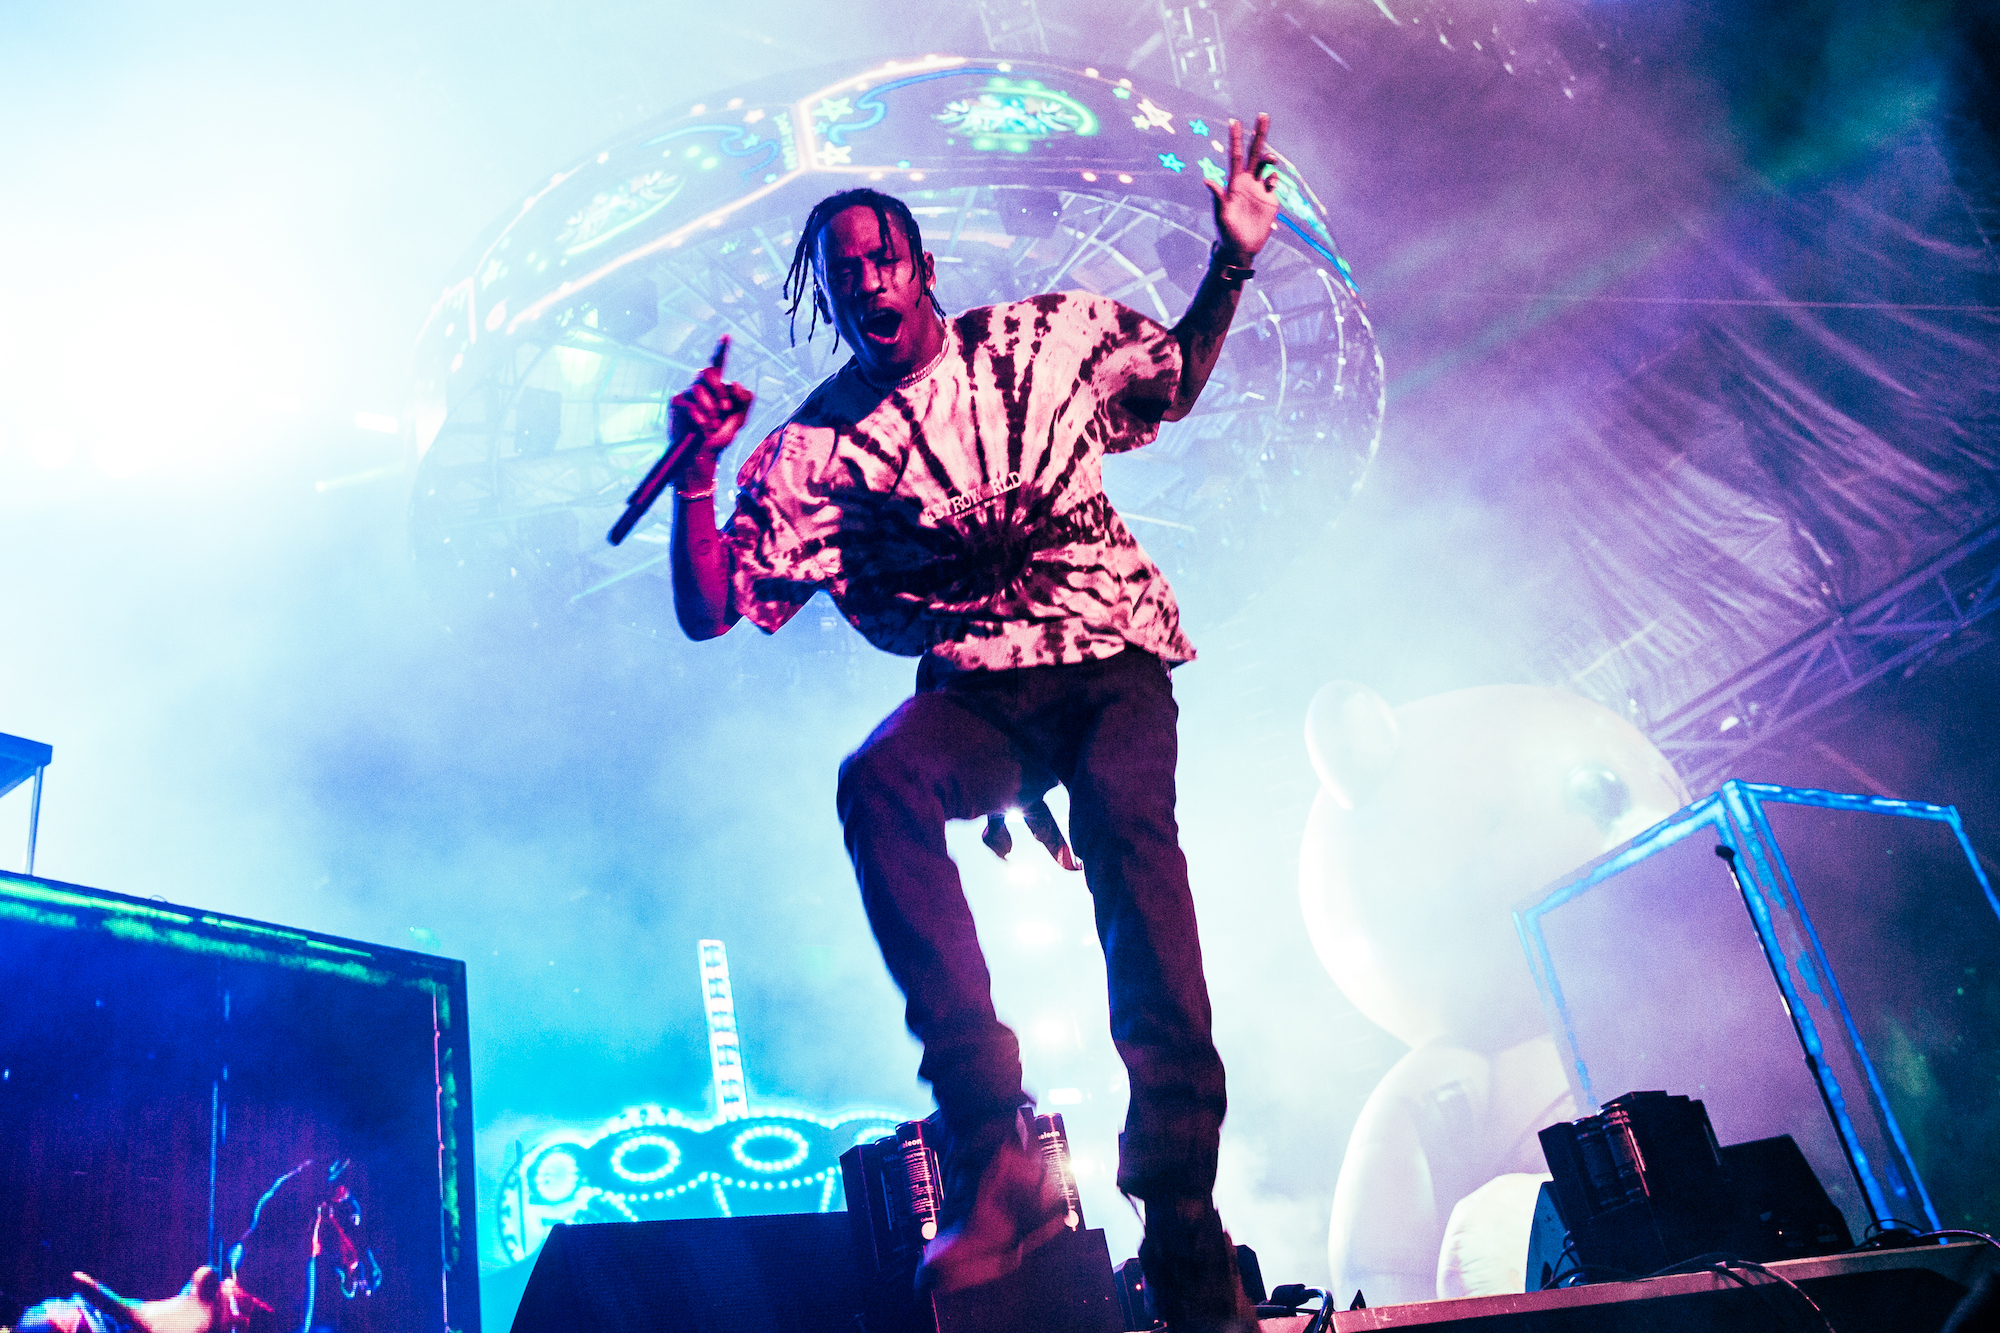 Travis Scott performing on stage with a blue and purple projection behind him